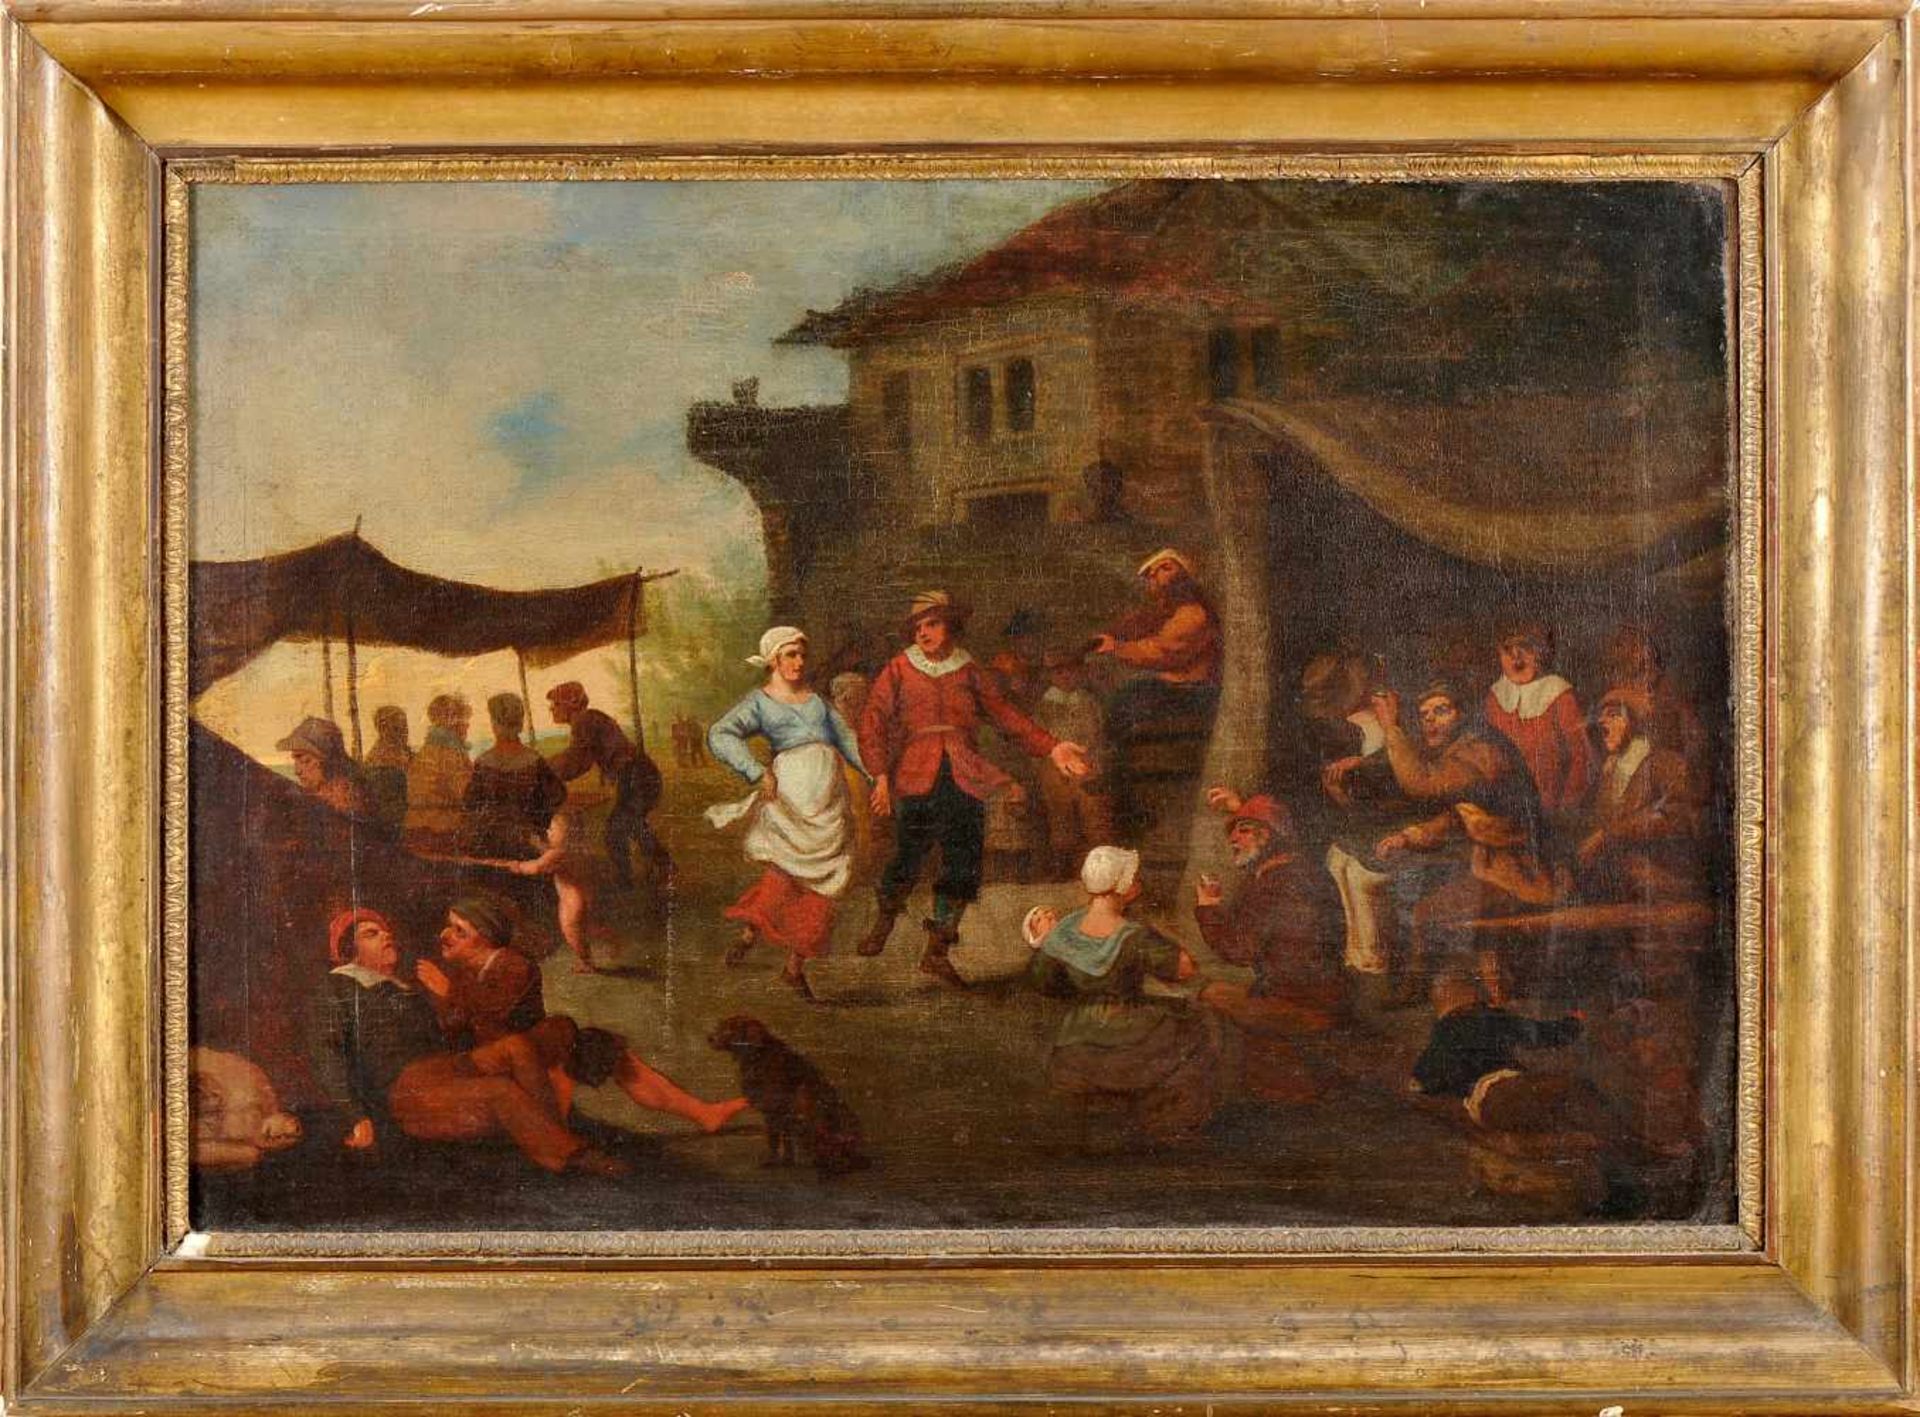 Figures outside the tavern